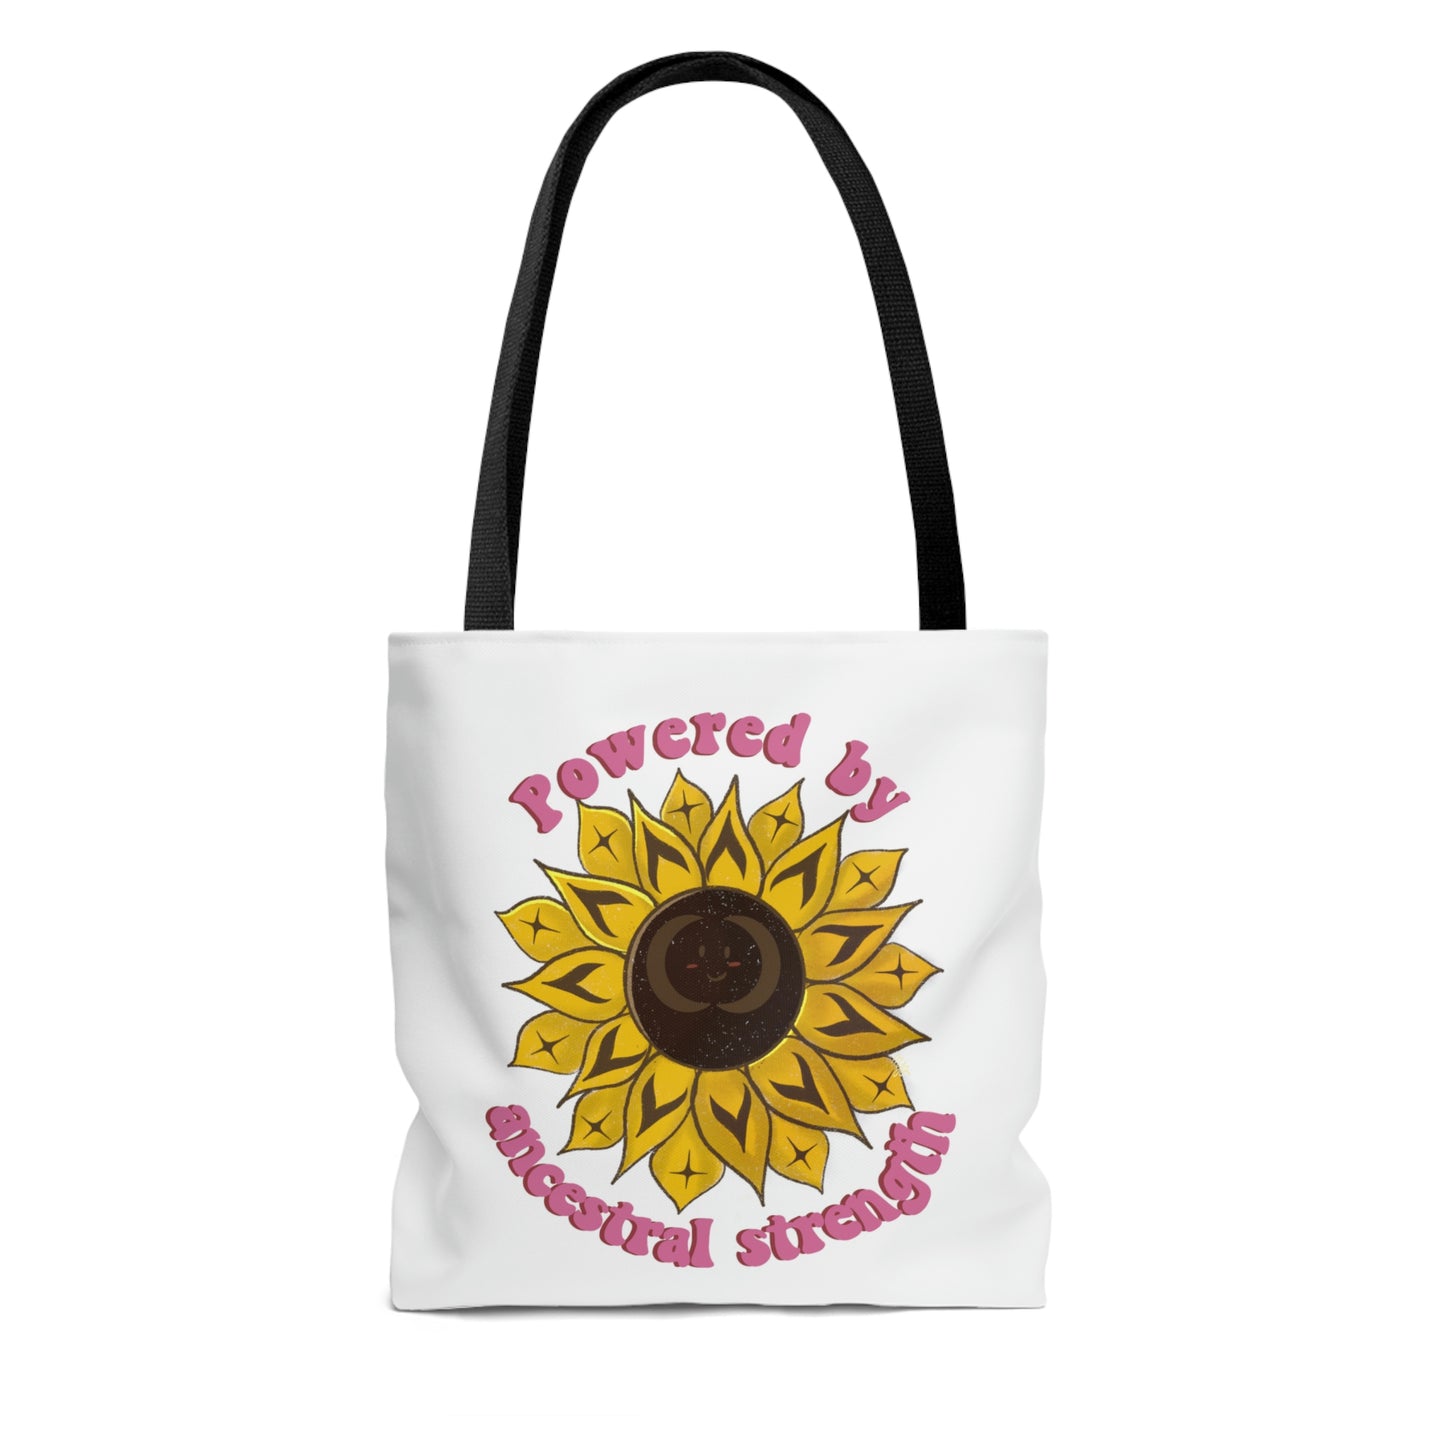 Powered by Ancestral Strength Tote